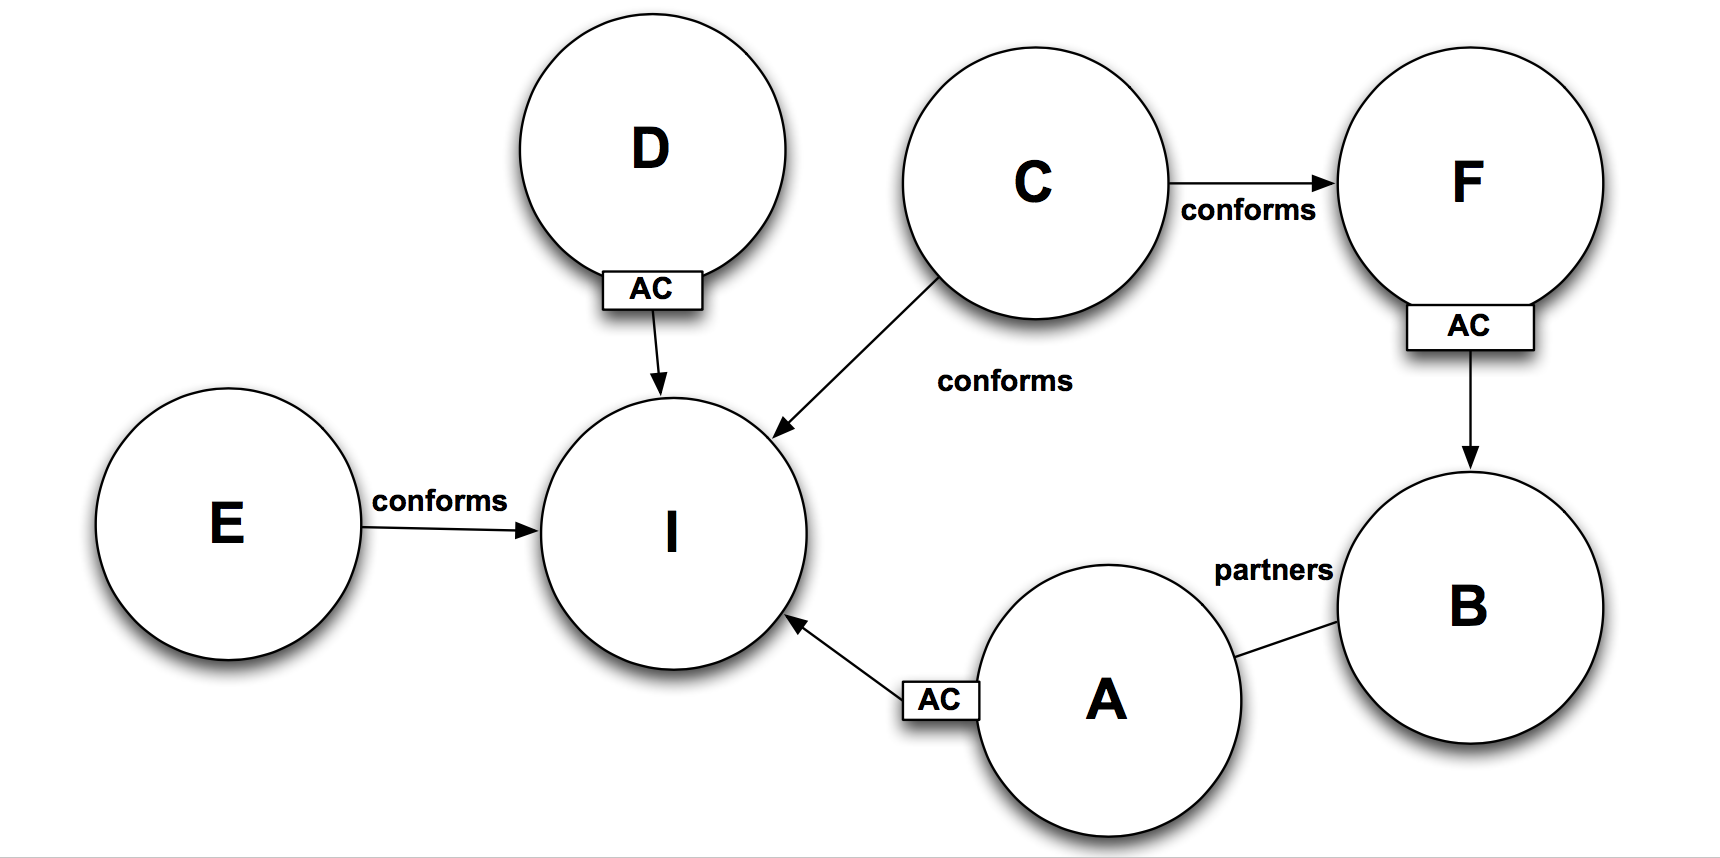 context mapping